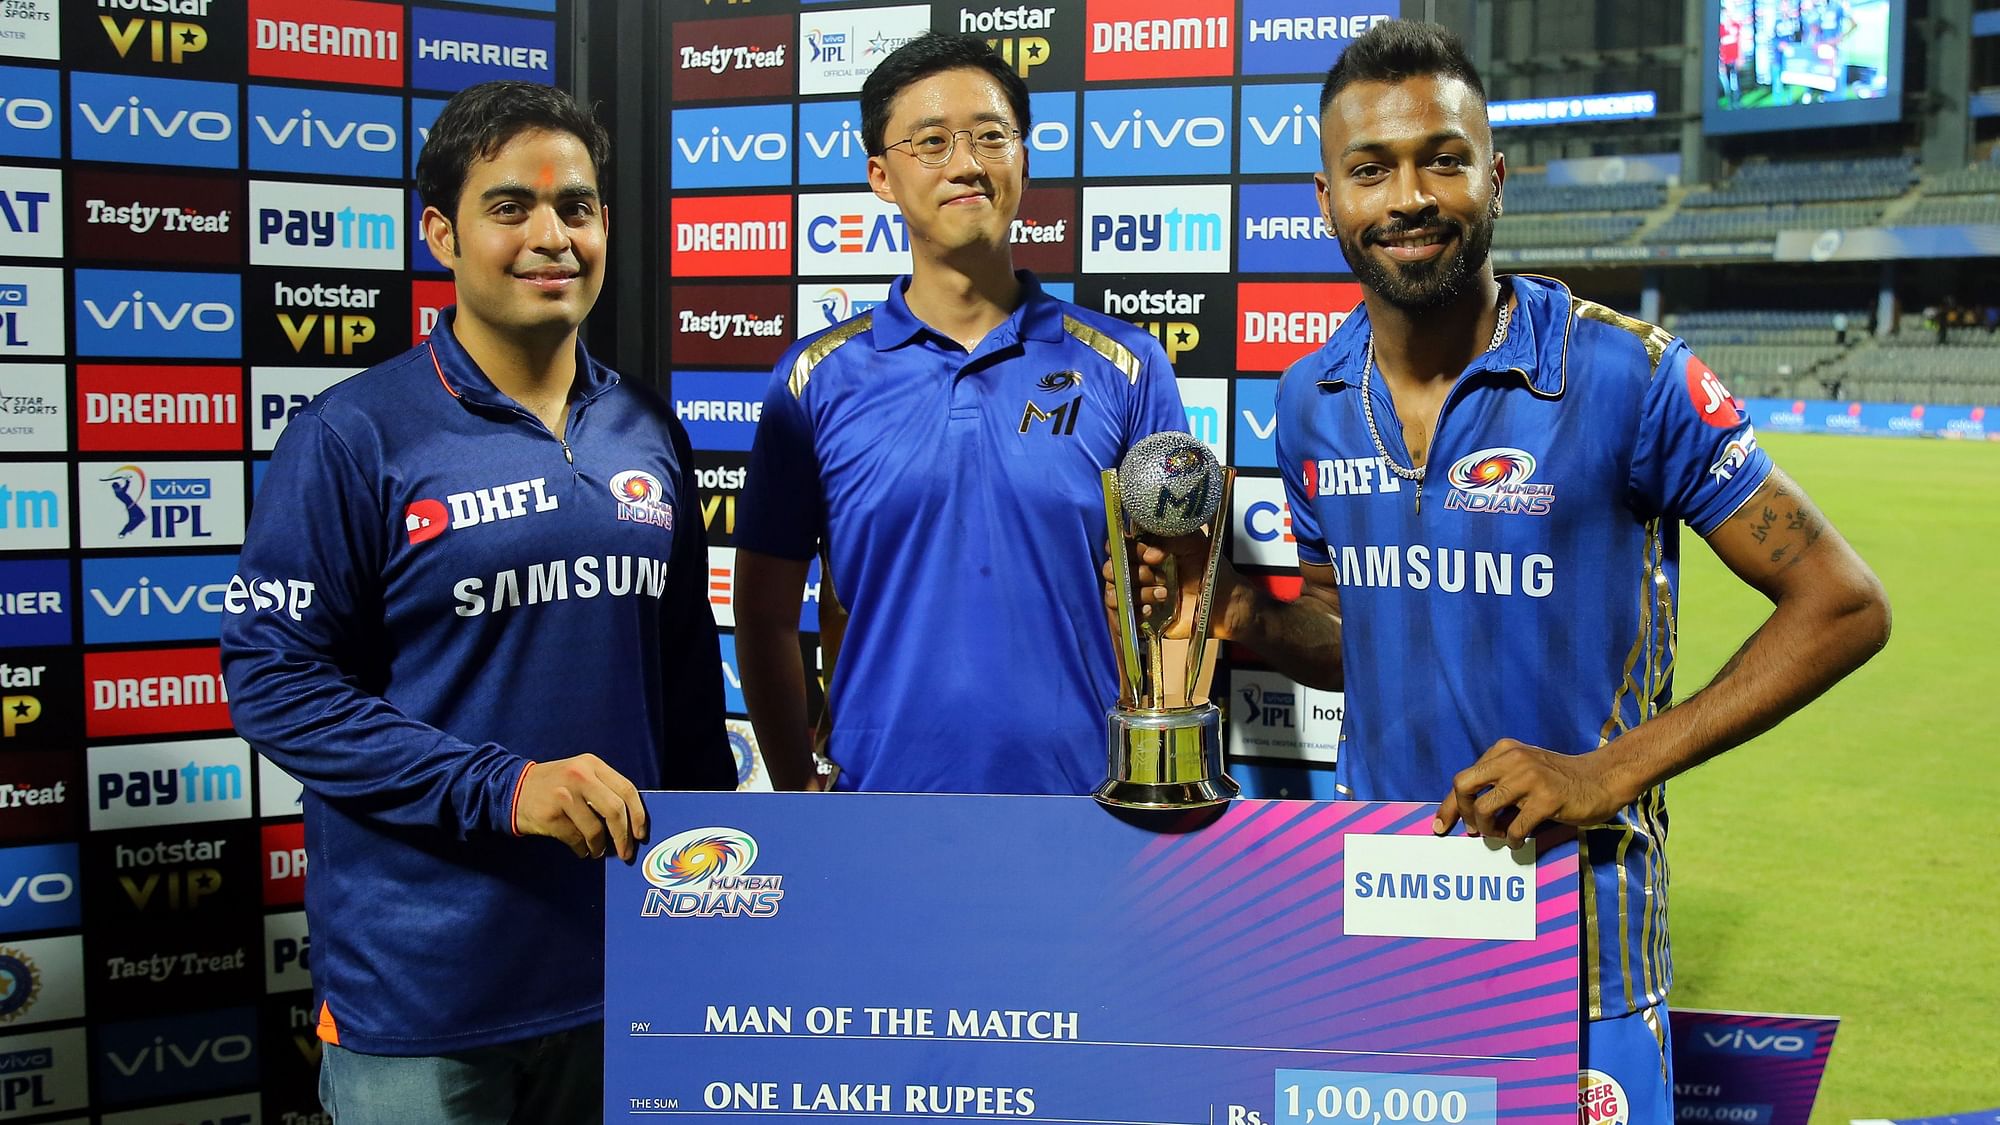 Hardik Pandya was adjudged man of the match for his bowling figures of 2/20 in three overs.